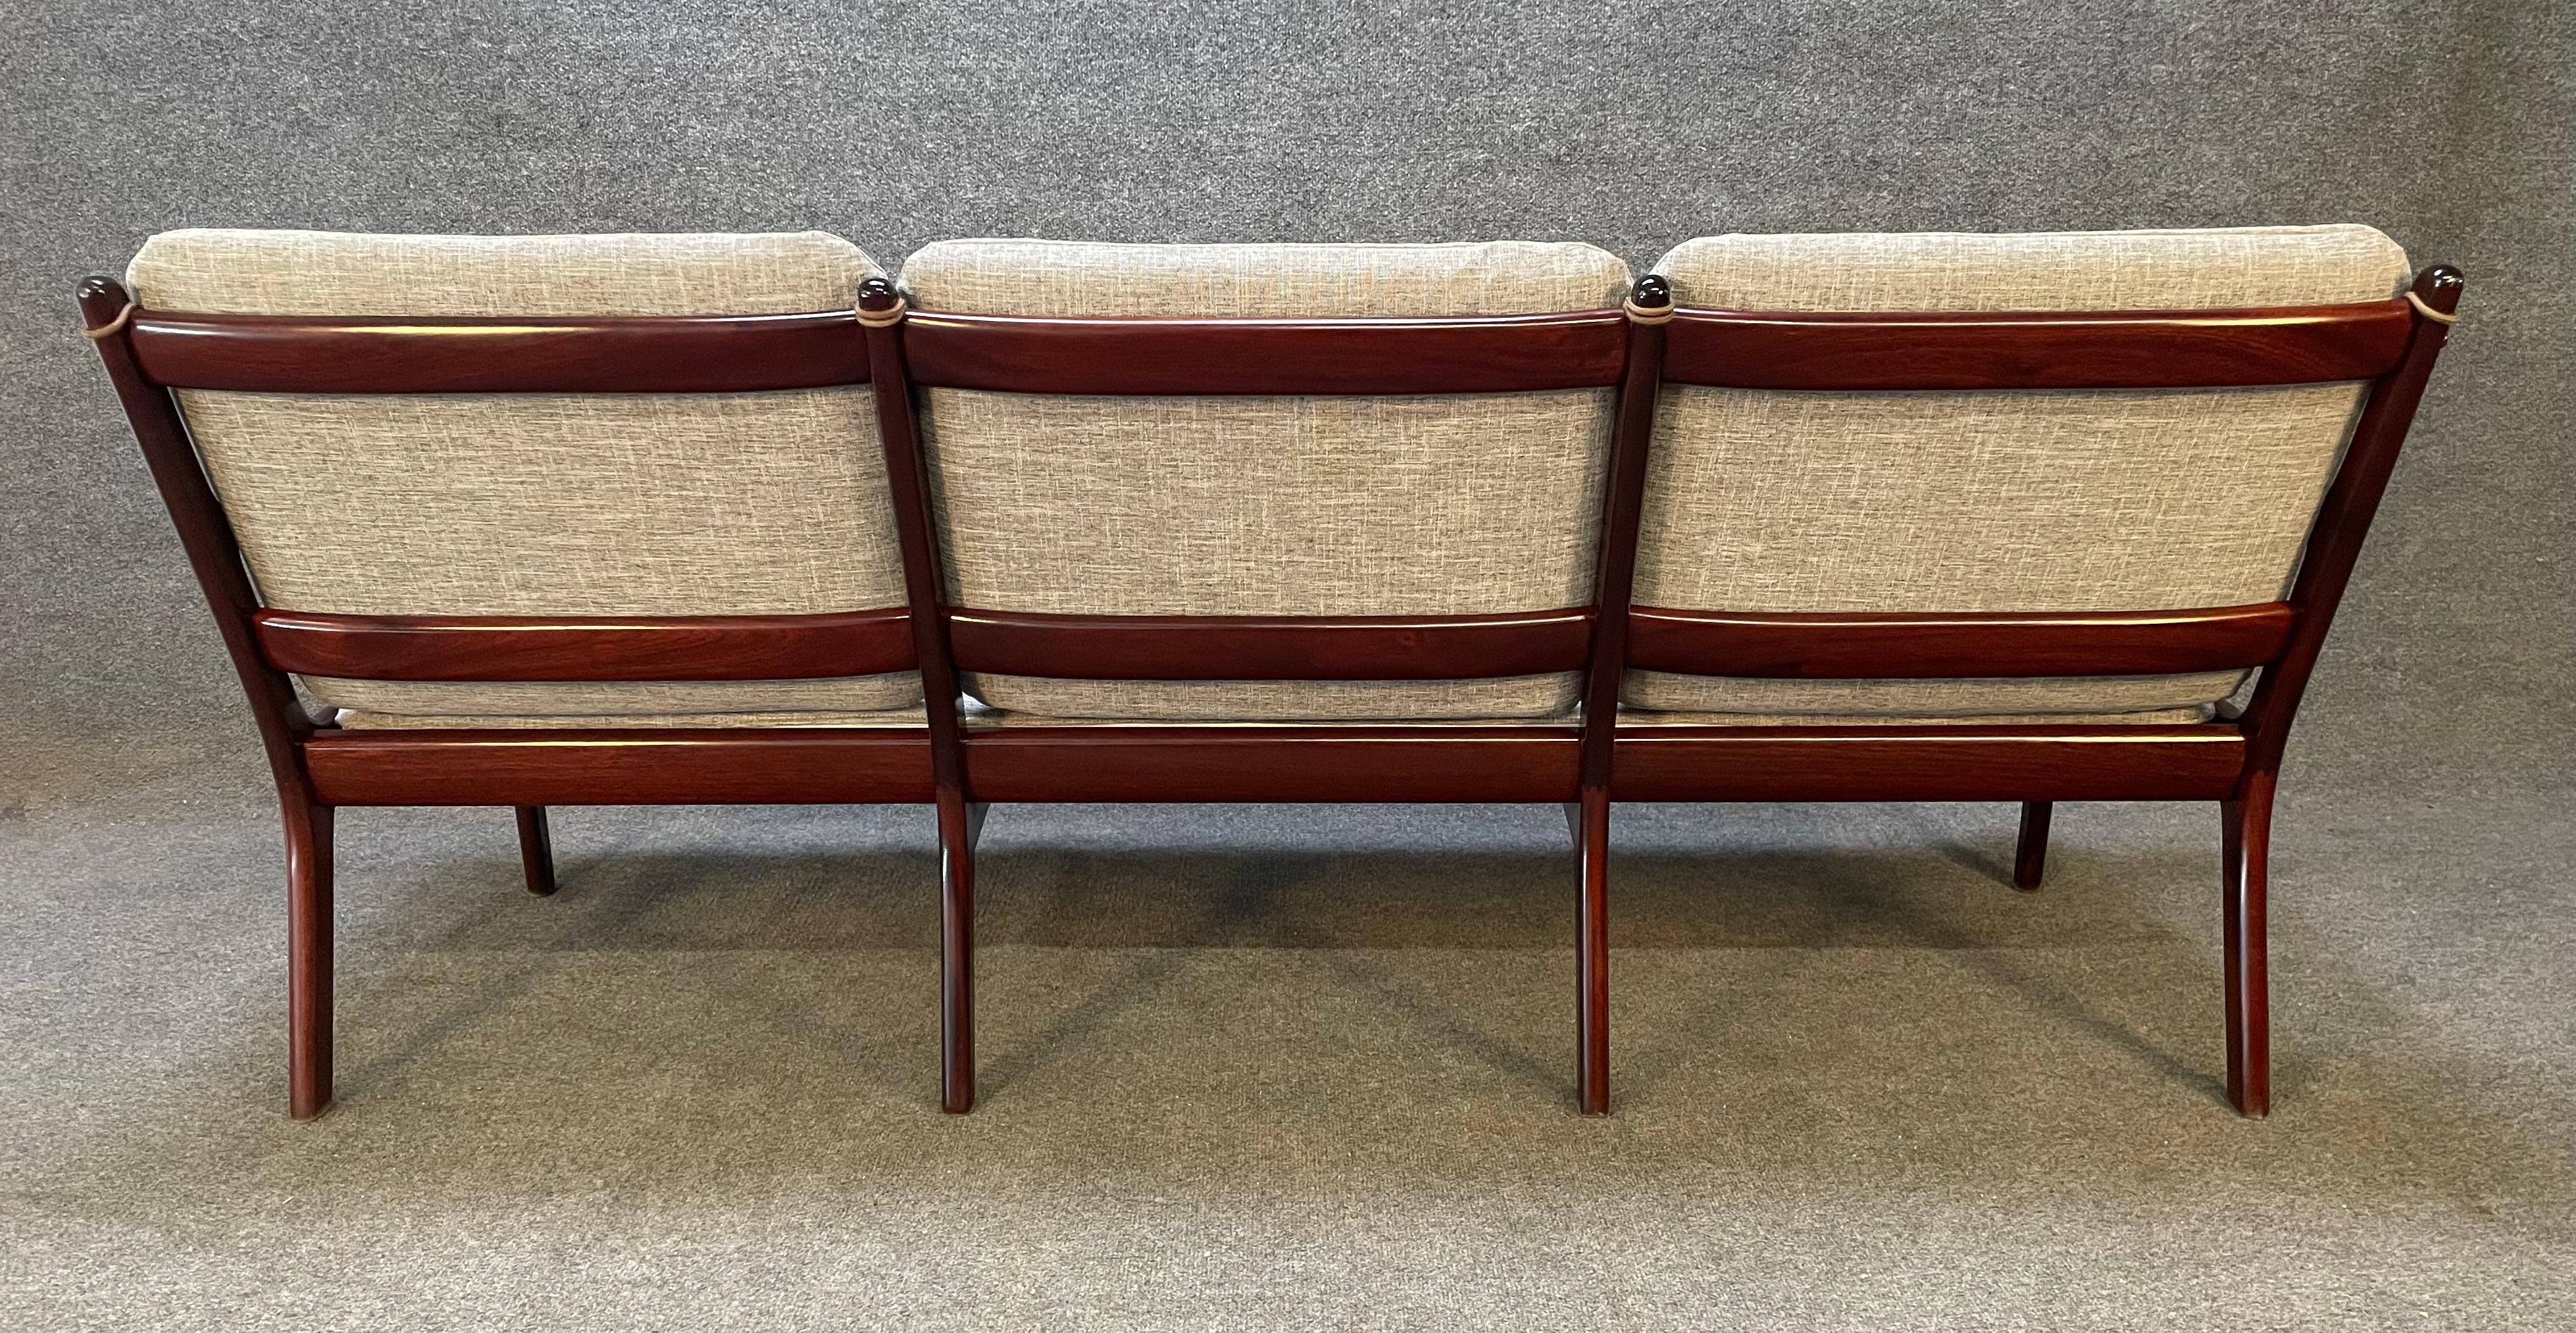 Vintage Danish Mid Century Mahogany Sofa by Ole Wanscher for Poul Jeppesen For Sale 1